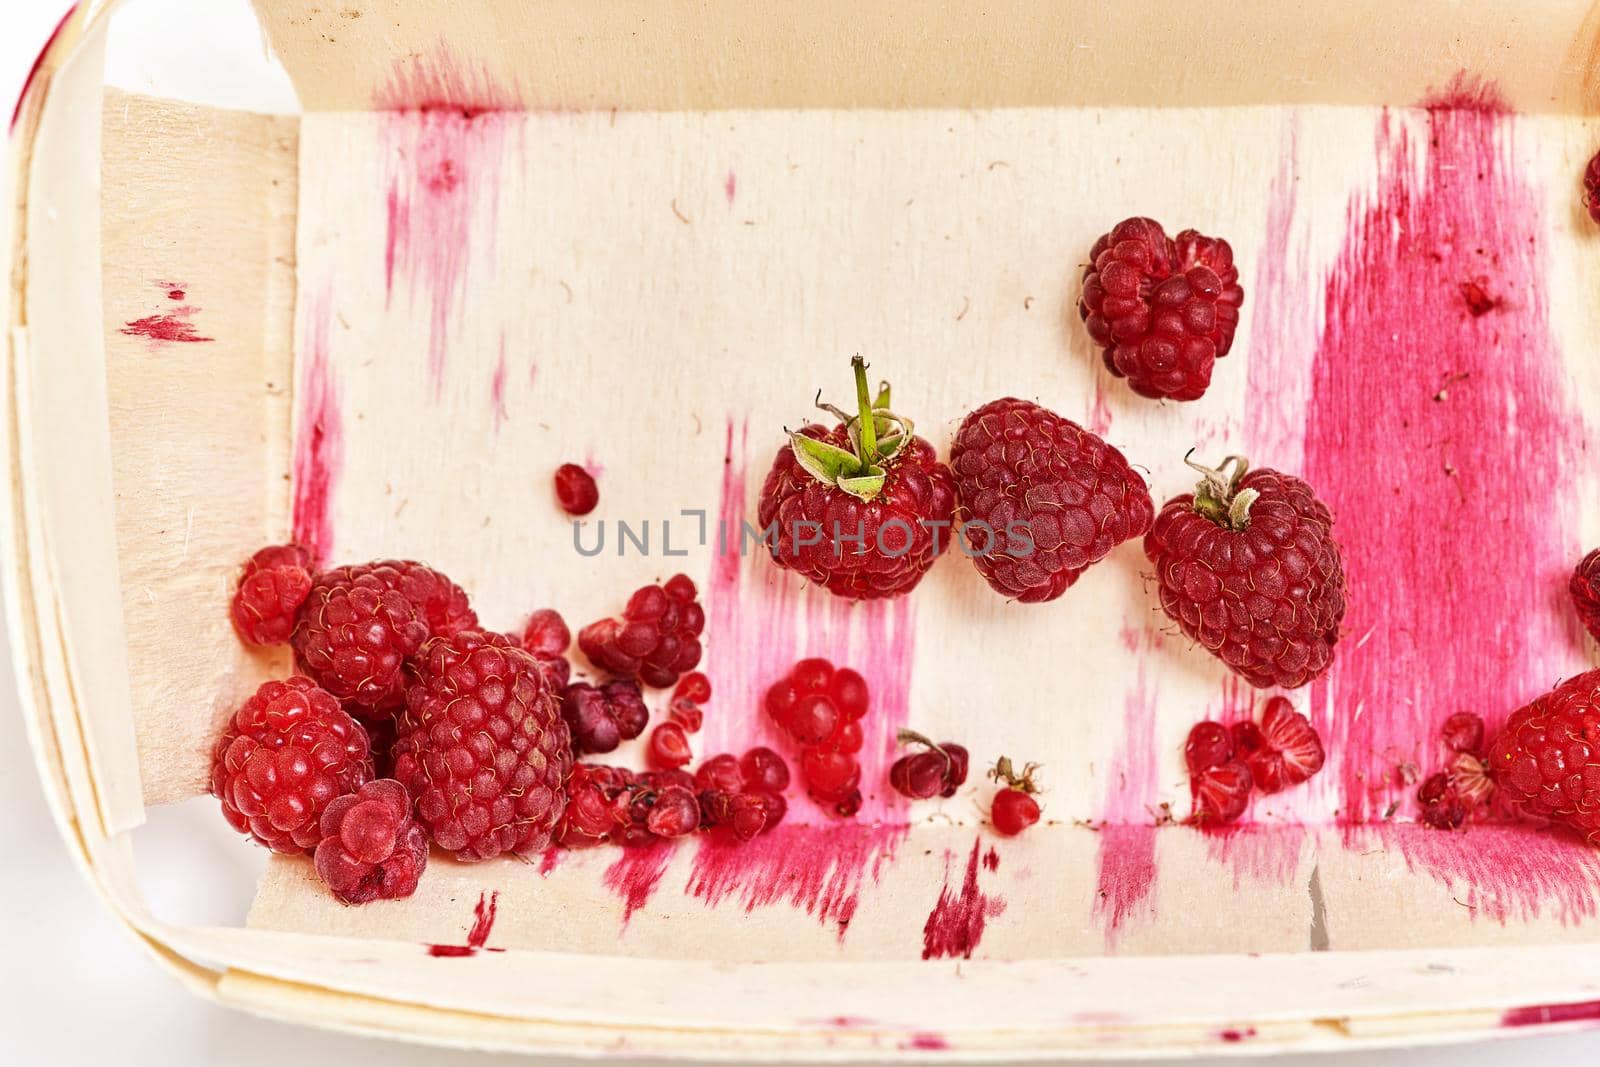 The half-eaten remnants of ripe raspberries in a small wooden container with streaks of red juice. Top view close up